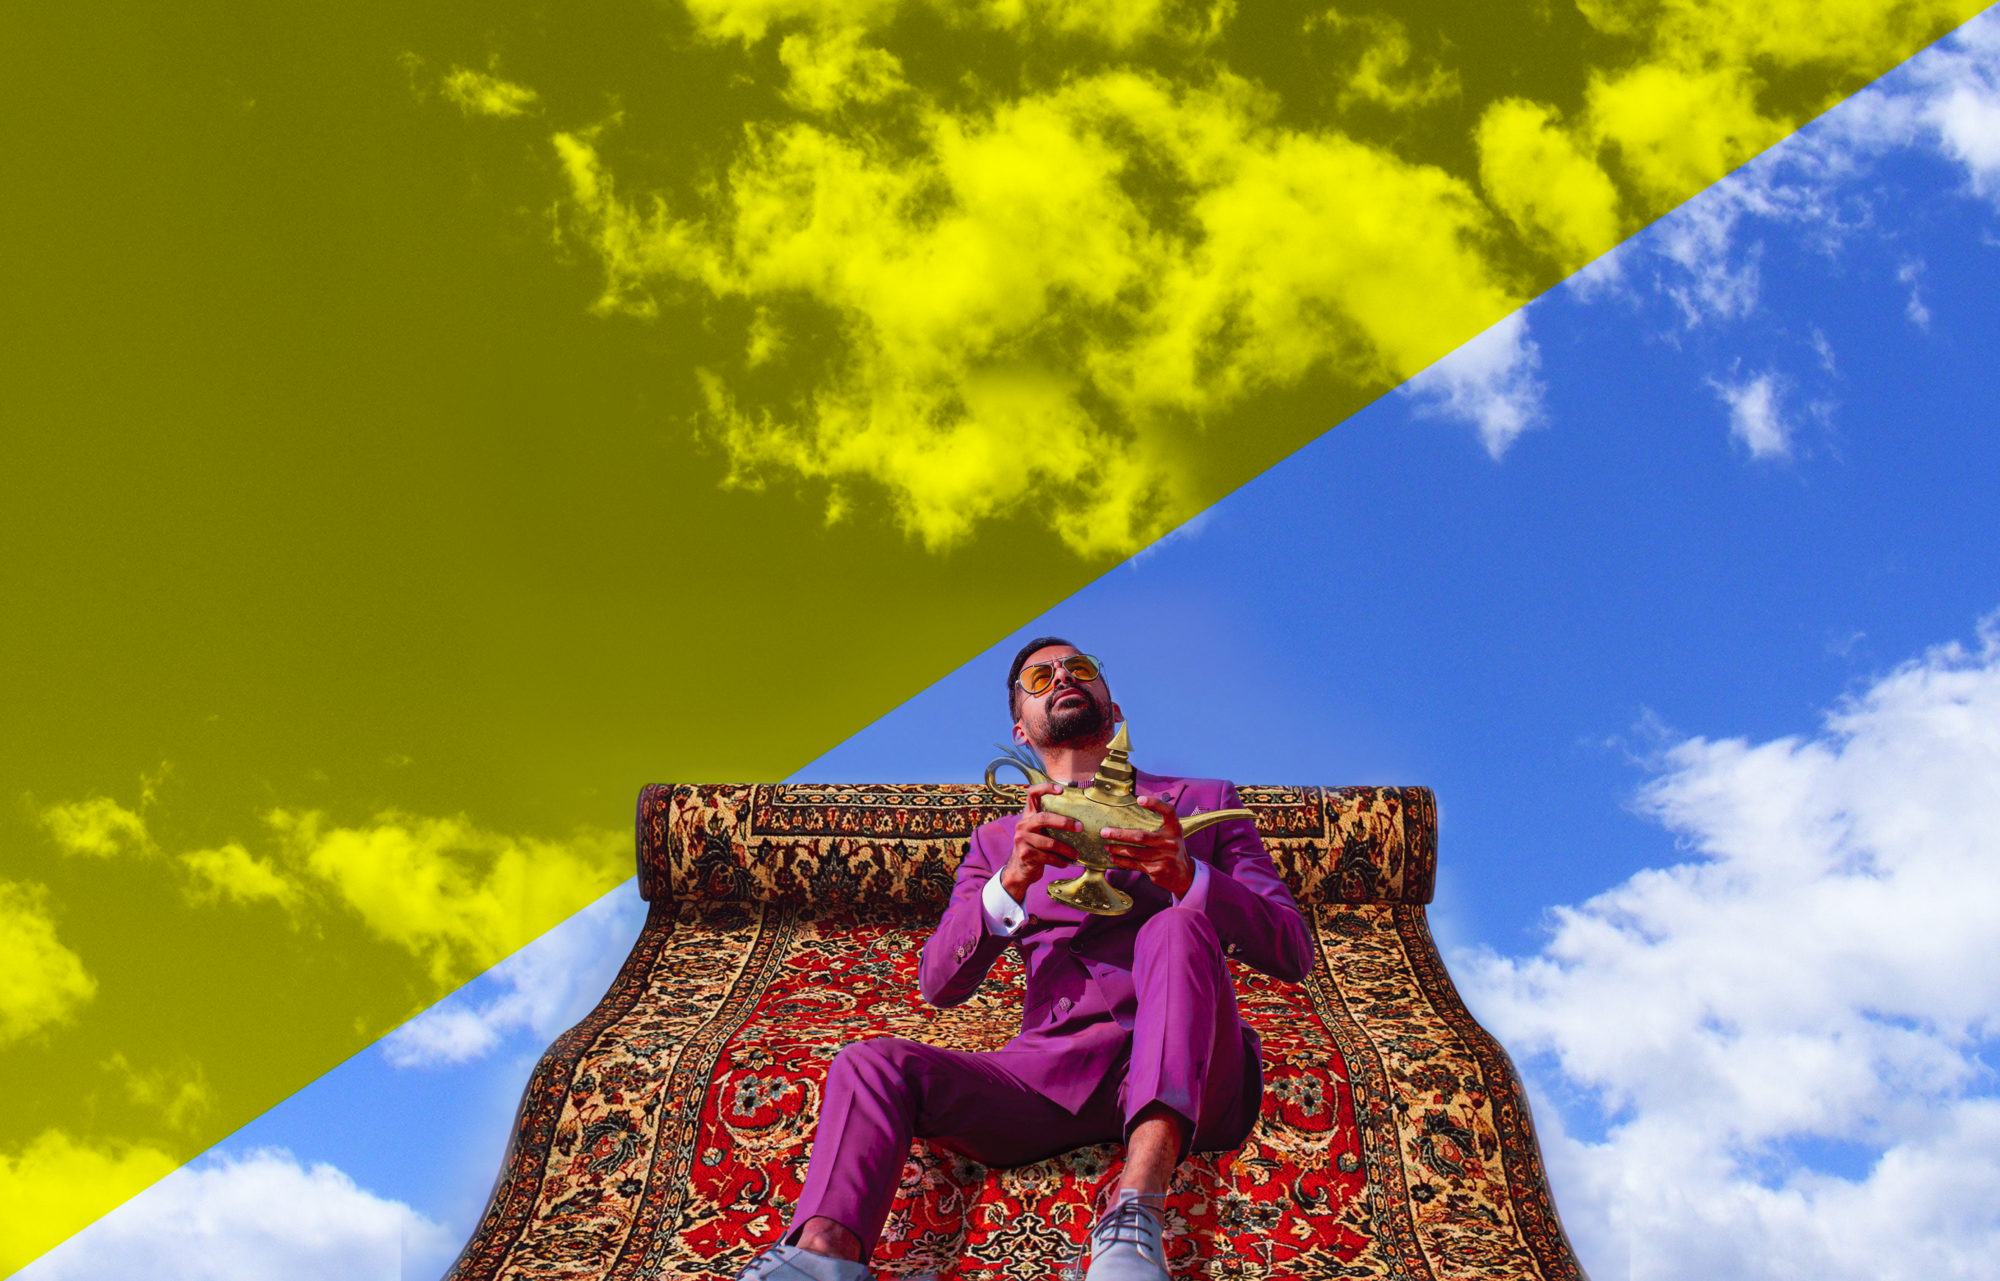 How to Steer Your Flying Carpet..or.. How to Connect With Your Audience